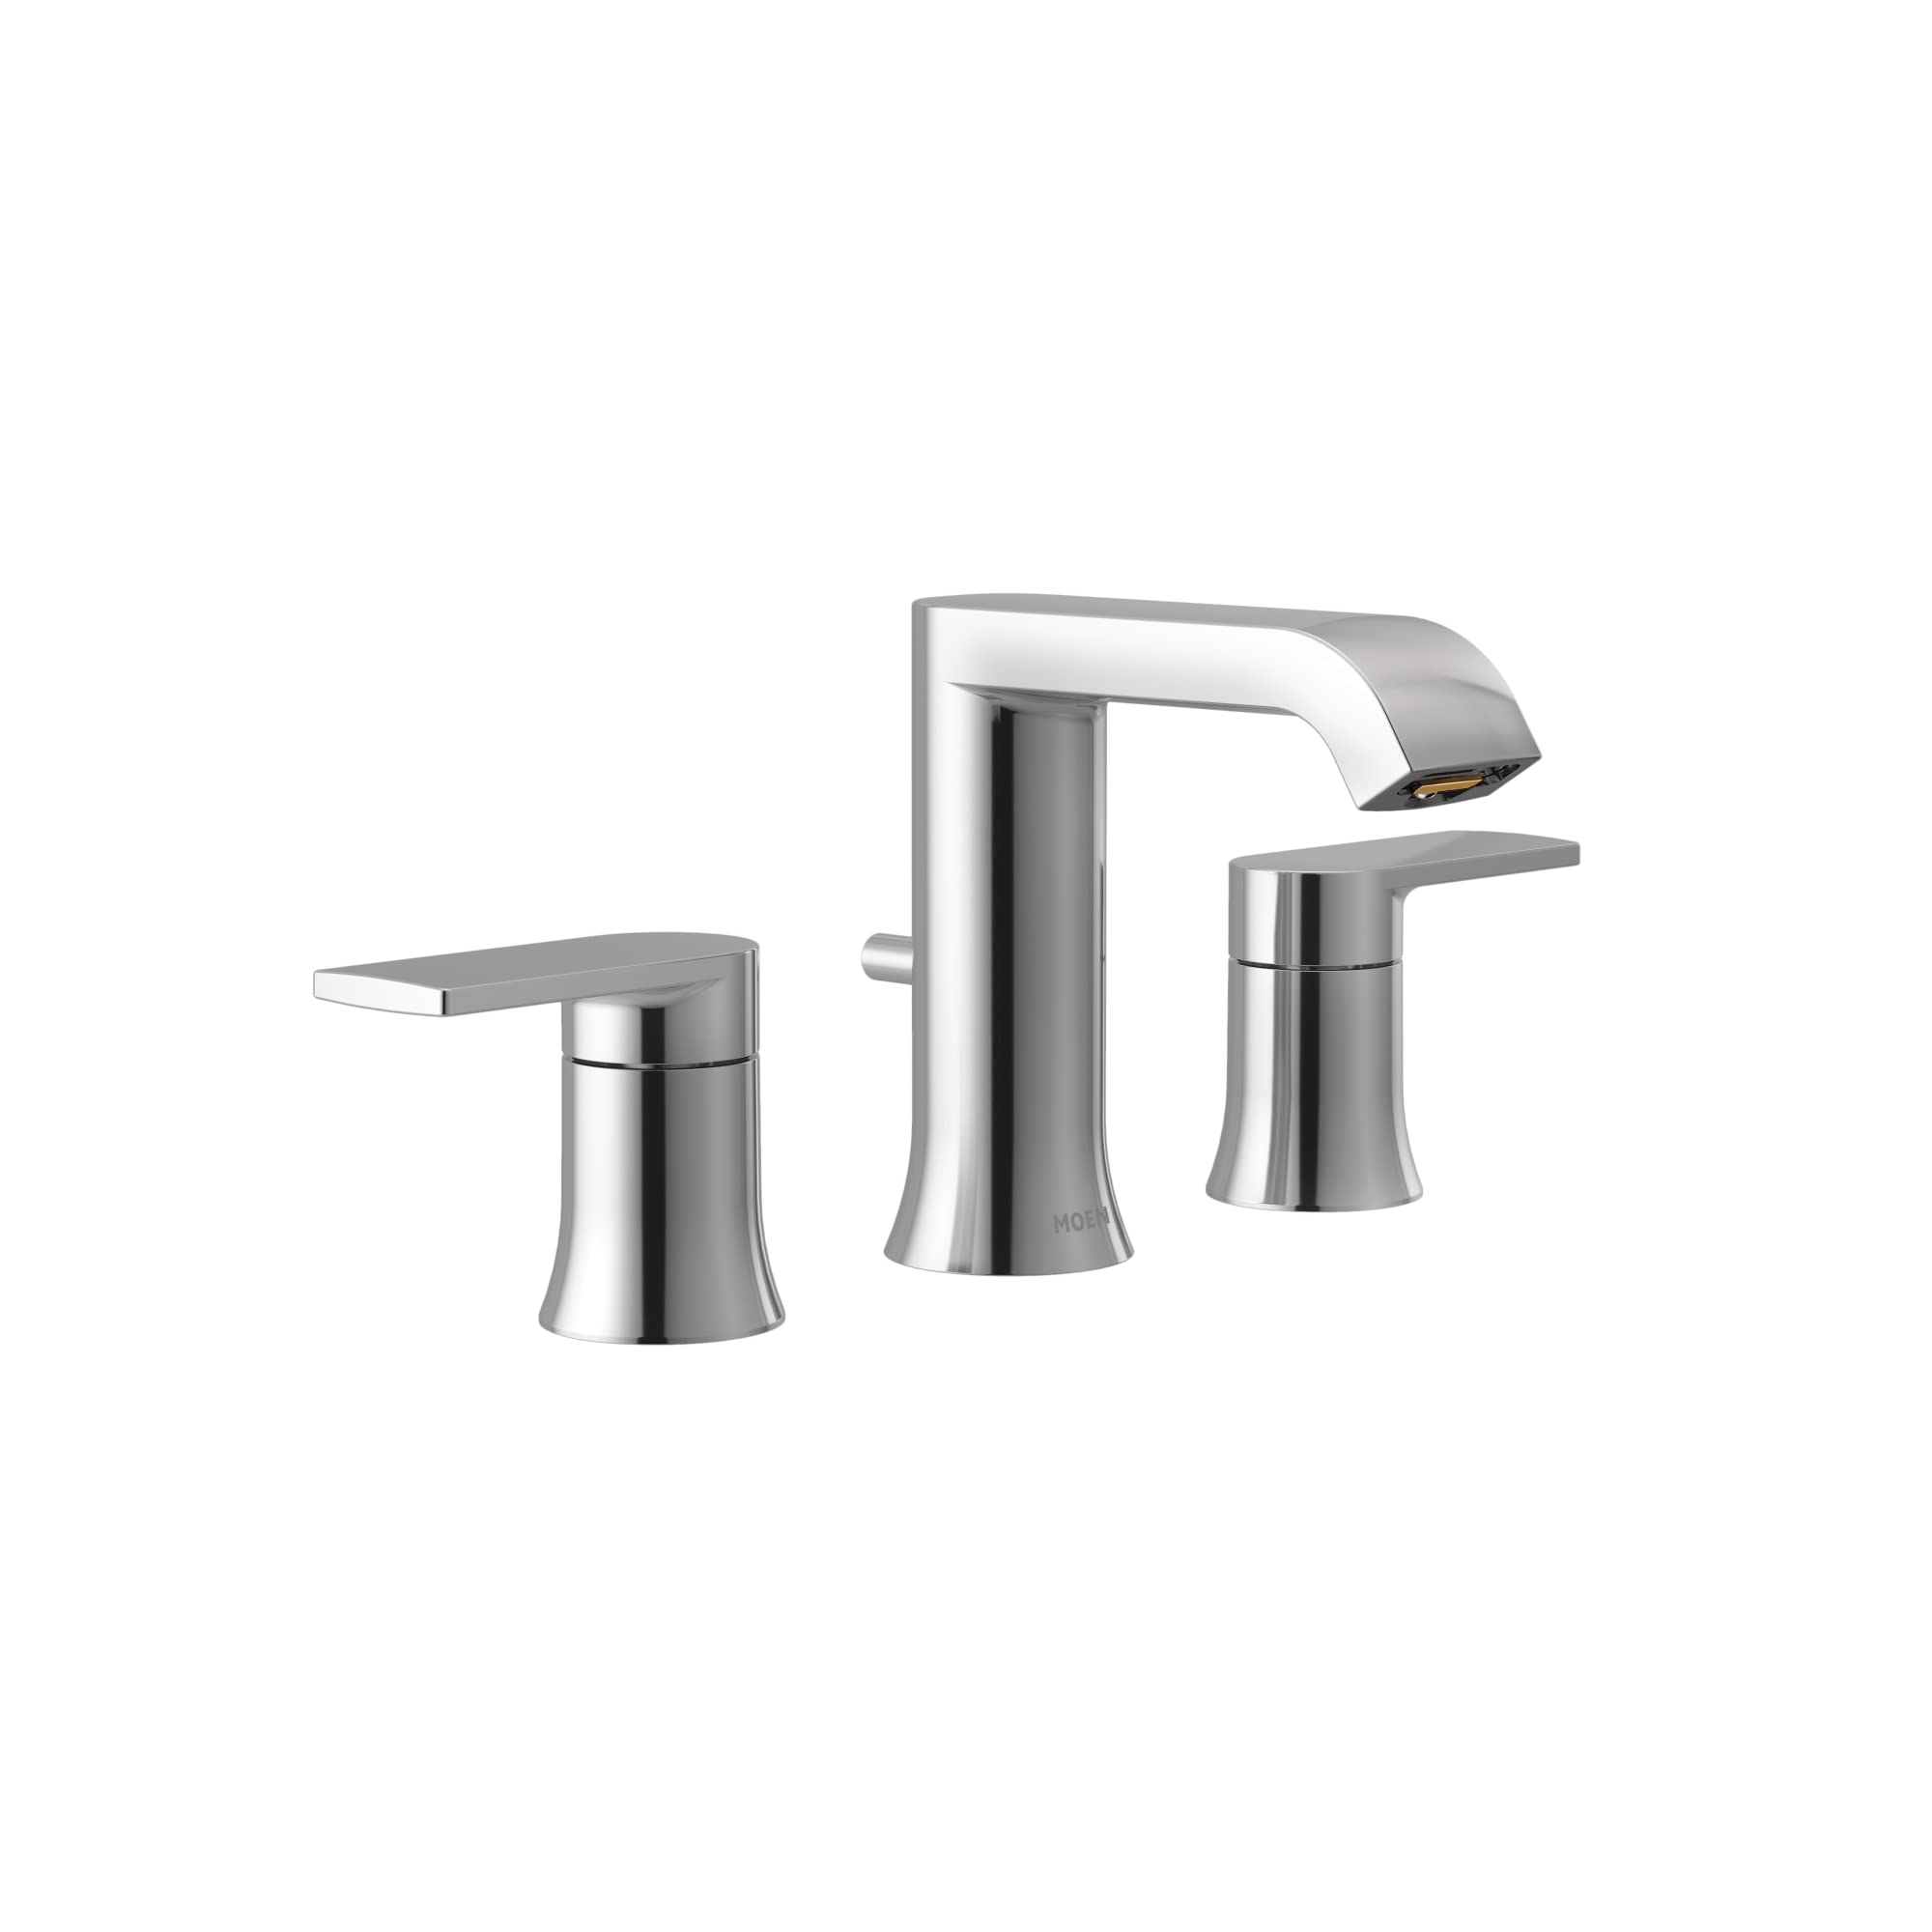 Moen Genta Chrome Two-Handle Widespread Modern Bathroom Faucet with Drain Assembly, (Valve Sold Separately), Bathroom Sink Faucet 3-Hole Application, T6708